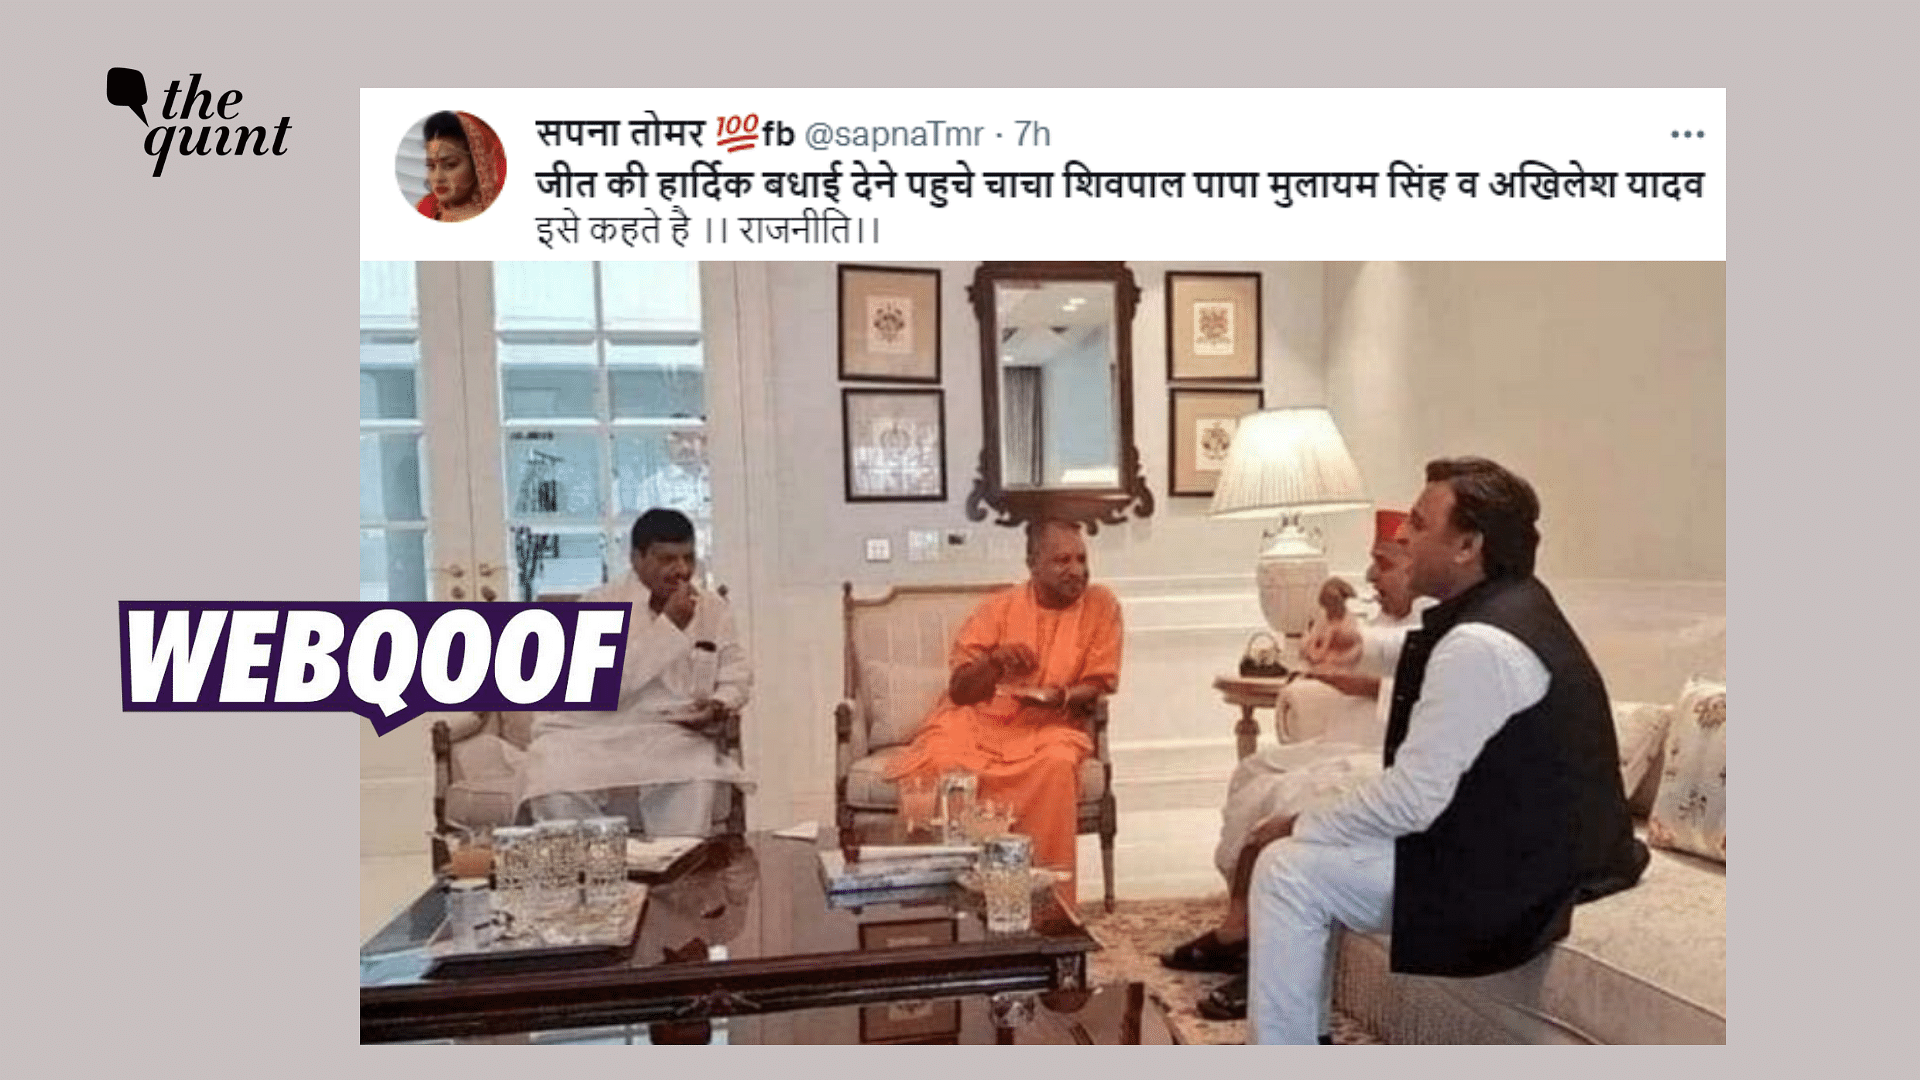 <div class="paragraphs"><p>The image is from 2019 when CM Yogi Adityanath visited Mulayam Singh Yadav to inquire about his health.</p></div>